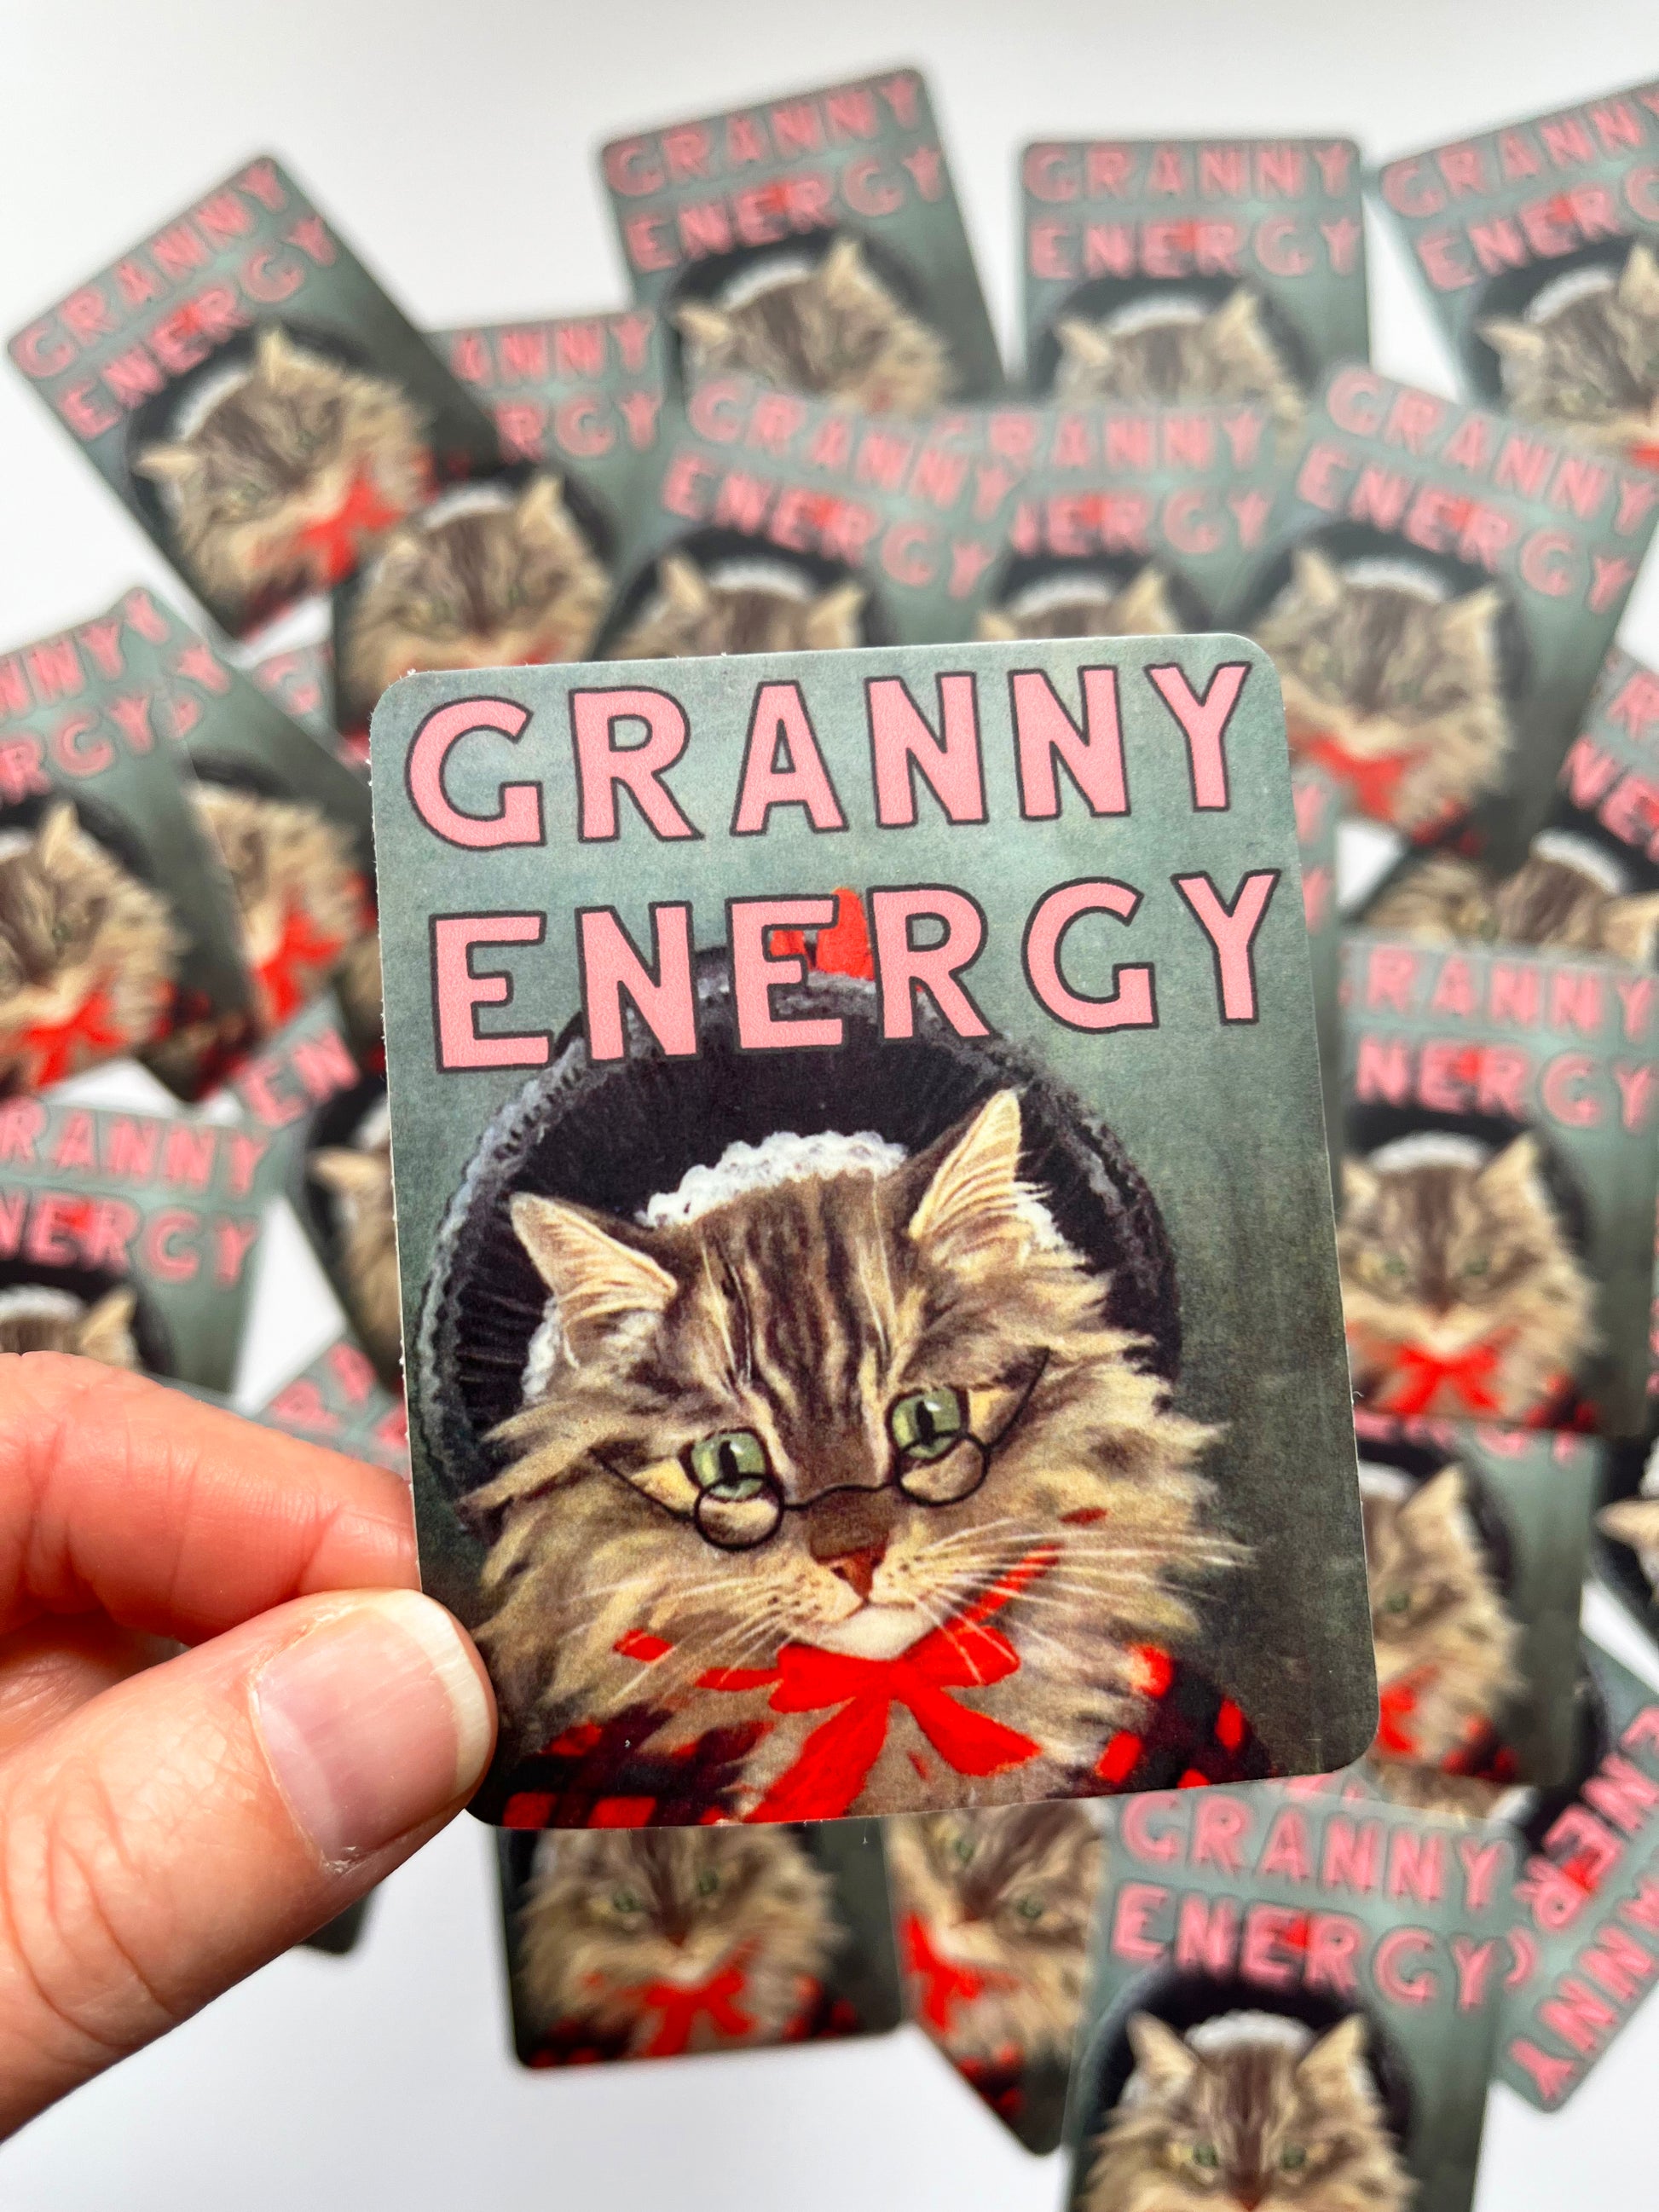 kitten cat tabby cute with glasses hat bow sweater vintage style retro vinyl sticker funny granny energy text grandma grandpa nana papa old soul crafts crafting stay at home introvert quiet time coin laundry montana 